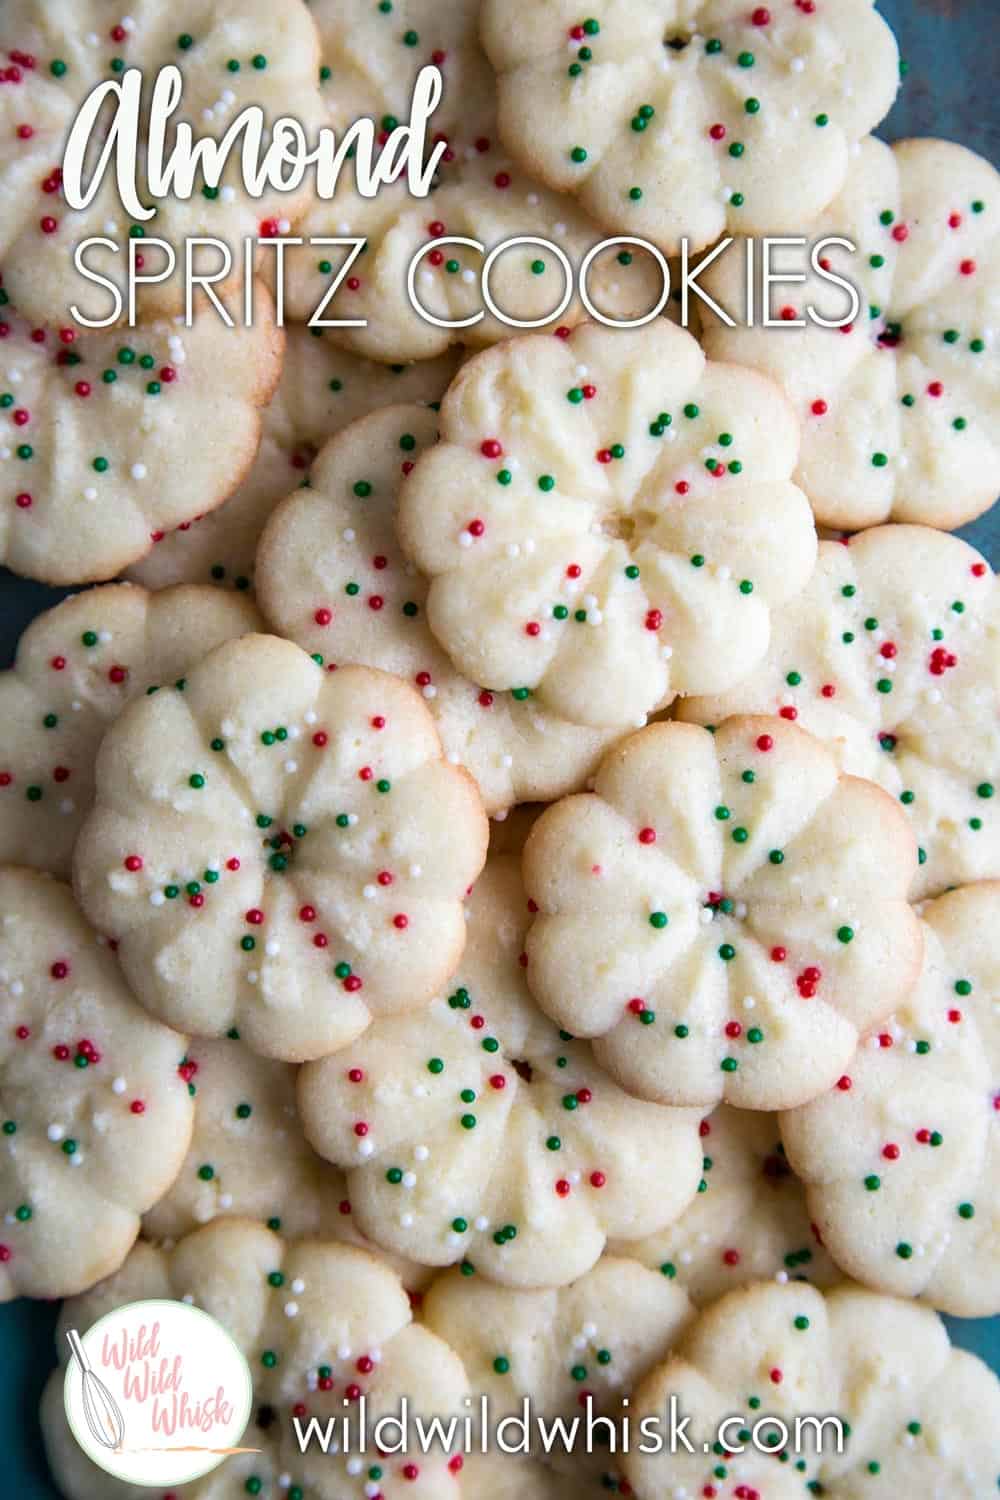 This Almond Spritz Cookie Recipe is so easy to make. The cookies can be piped into any festive shapes for the holiday. #wildwildwhisk #spritzcookies #spritzcookierecipe #almondspritz #christmascookies #christmascookieexchange #christmascookierecipe #almondcookies #almond #cookiepress